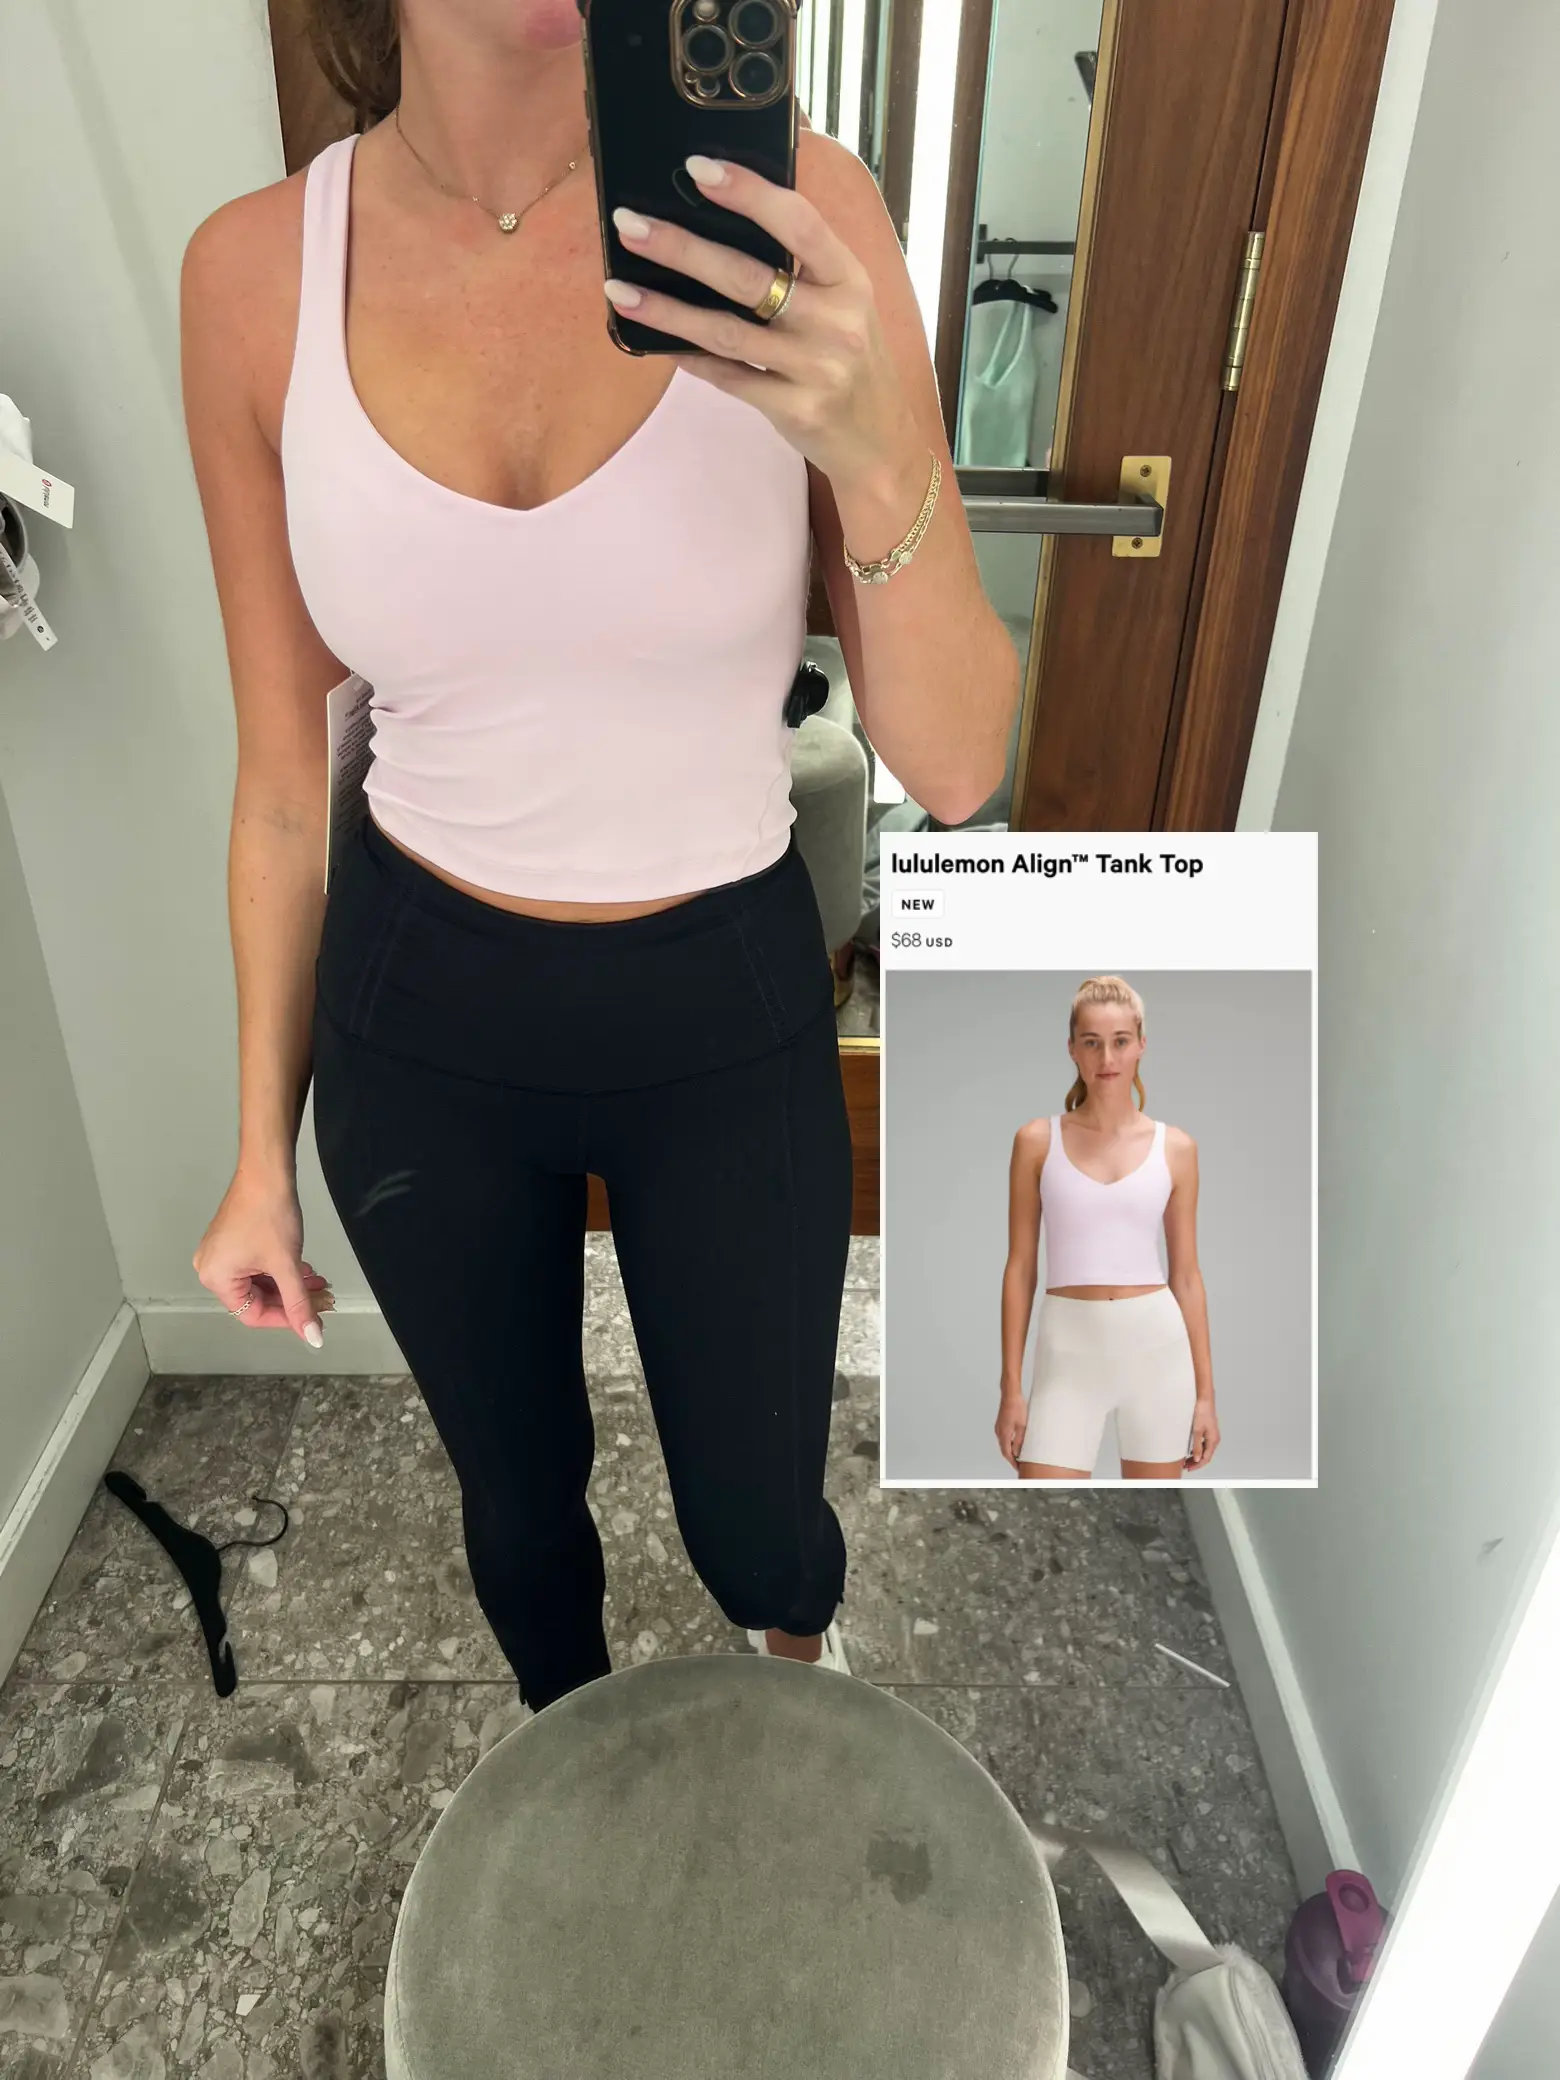 Must have Align tank top at Lululemon, Gallery posted by Jessica Ferris